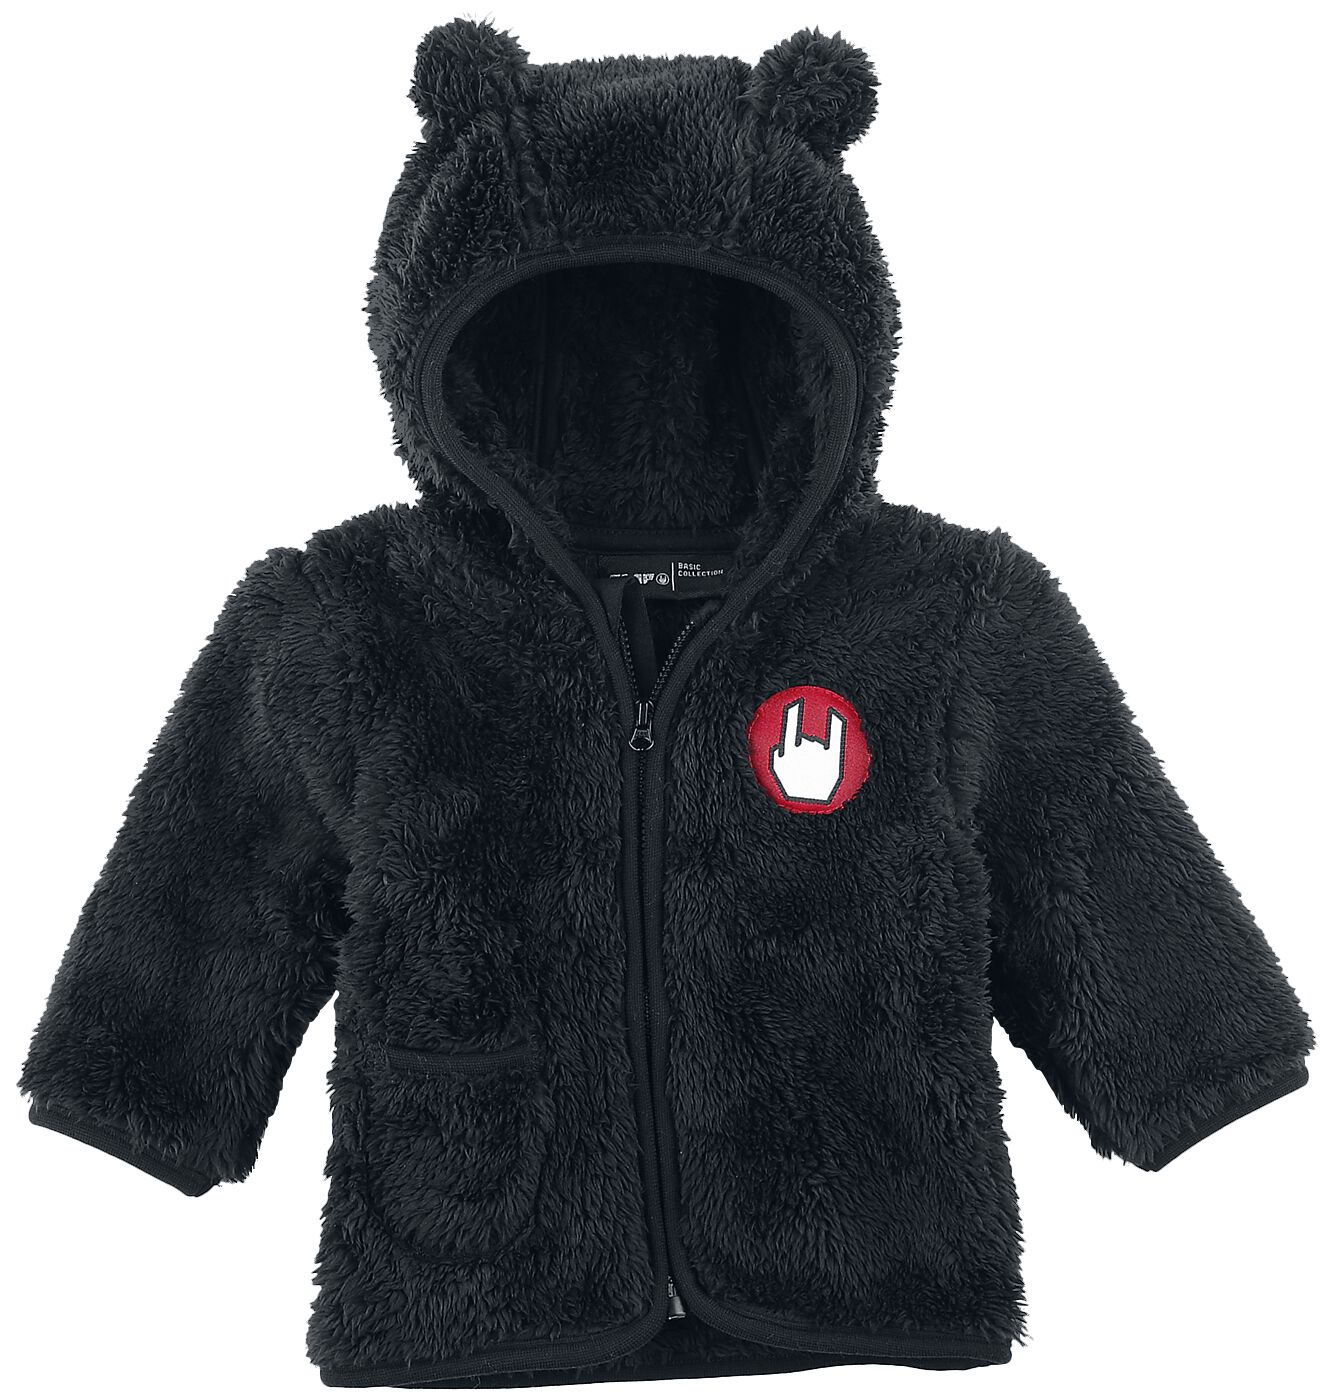 EMP Basic Collection Fluffy Hooded Jacket Baby hooded jackets black